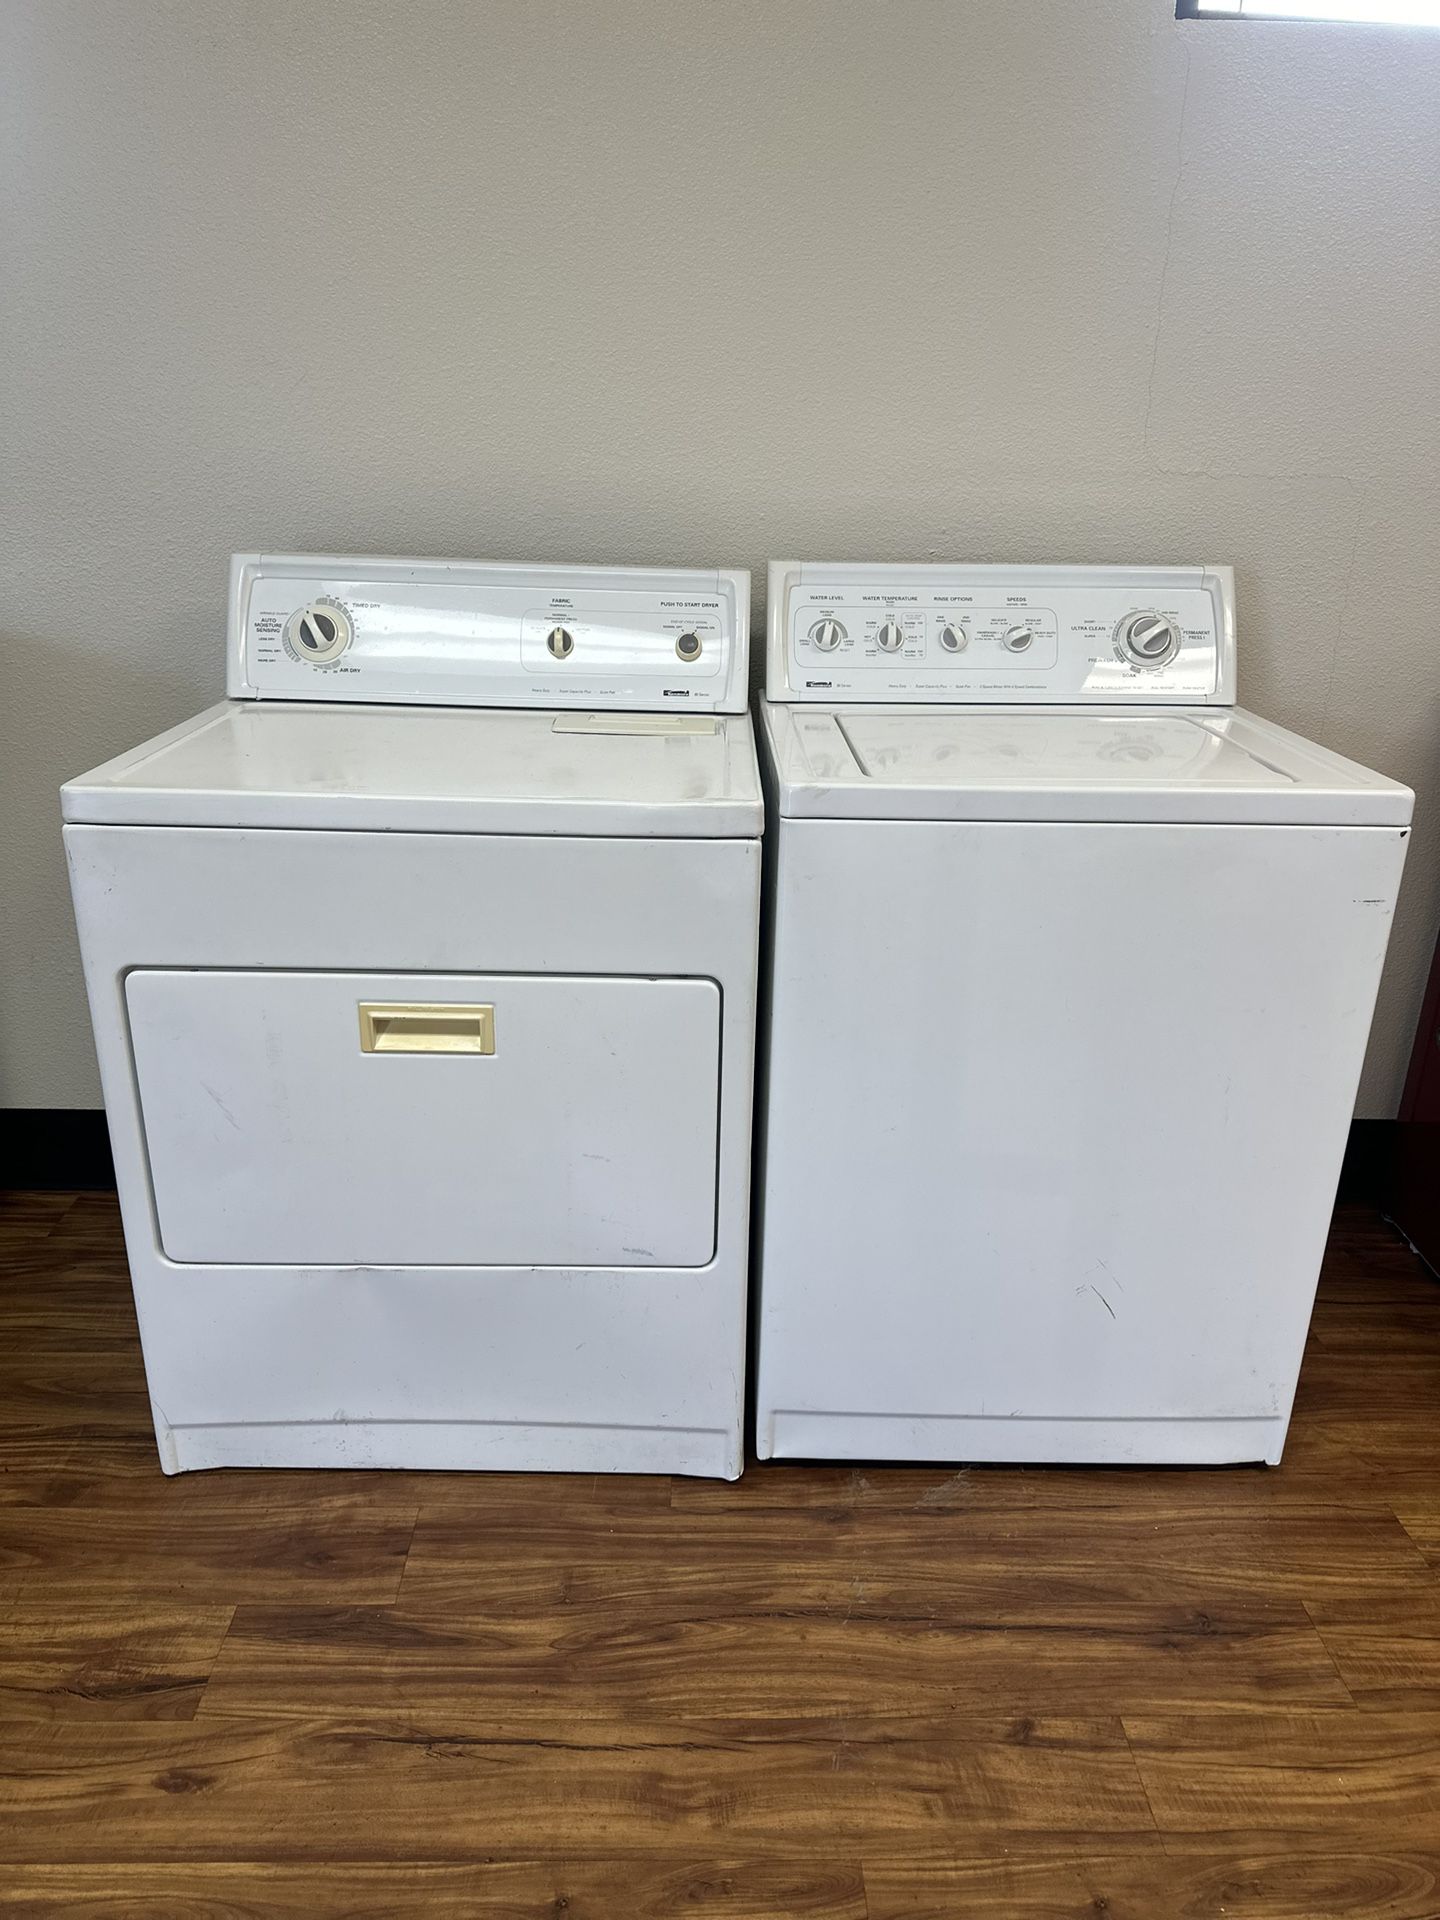 Kenmore 80 series XL Capacity  Electric washer and dryer , comes with a 30-day warranty.